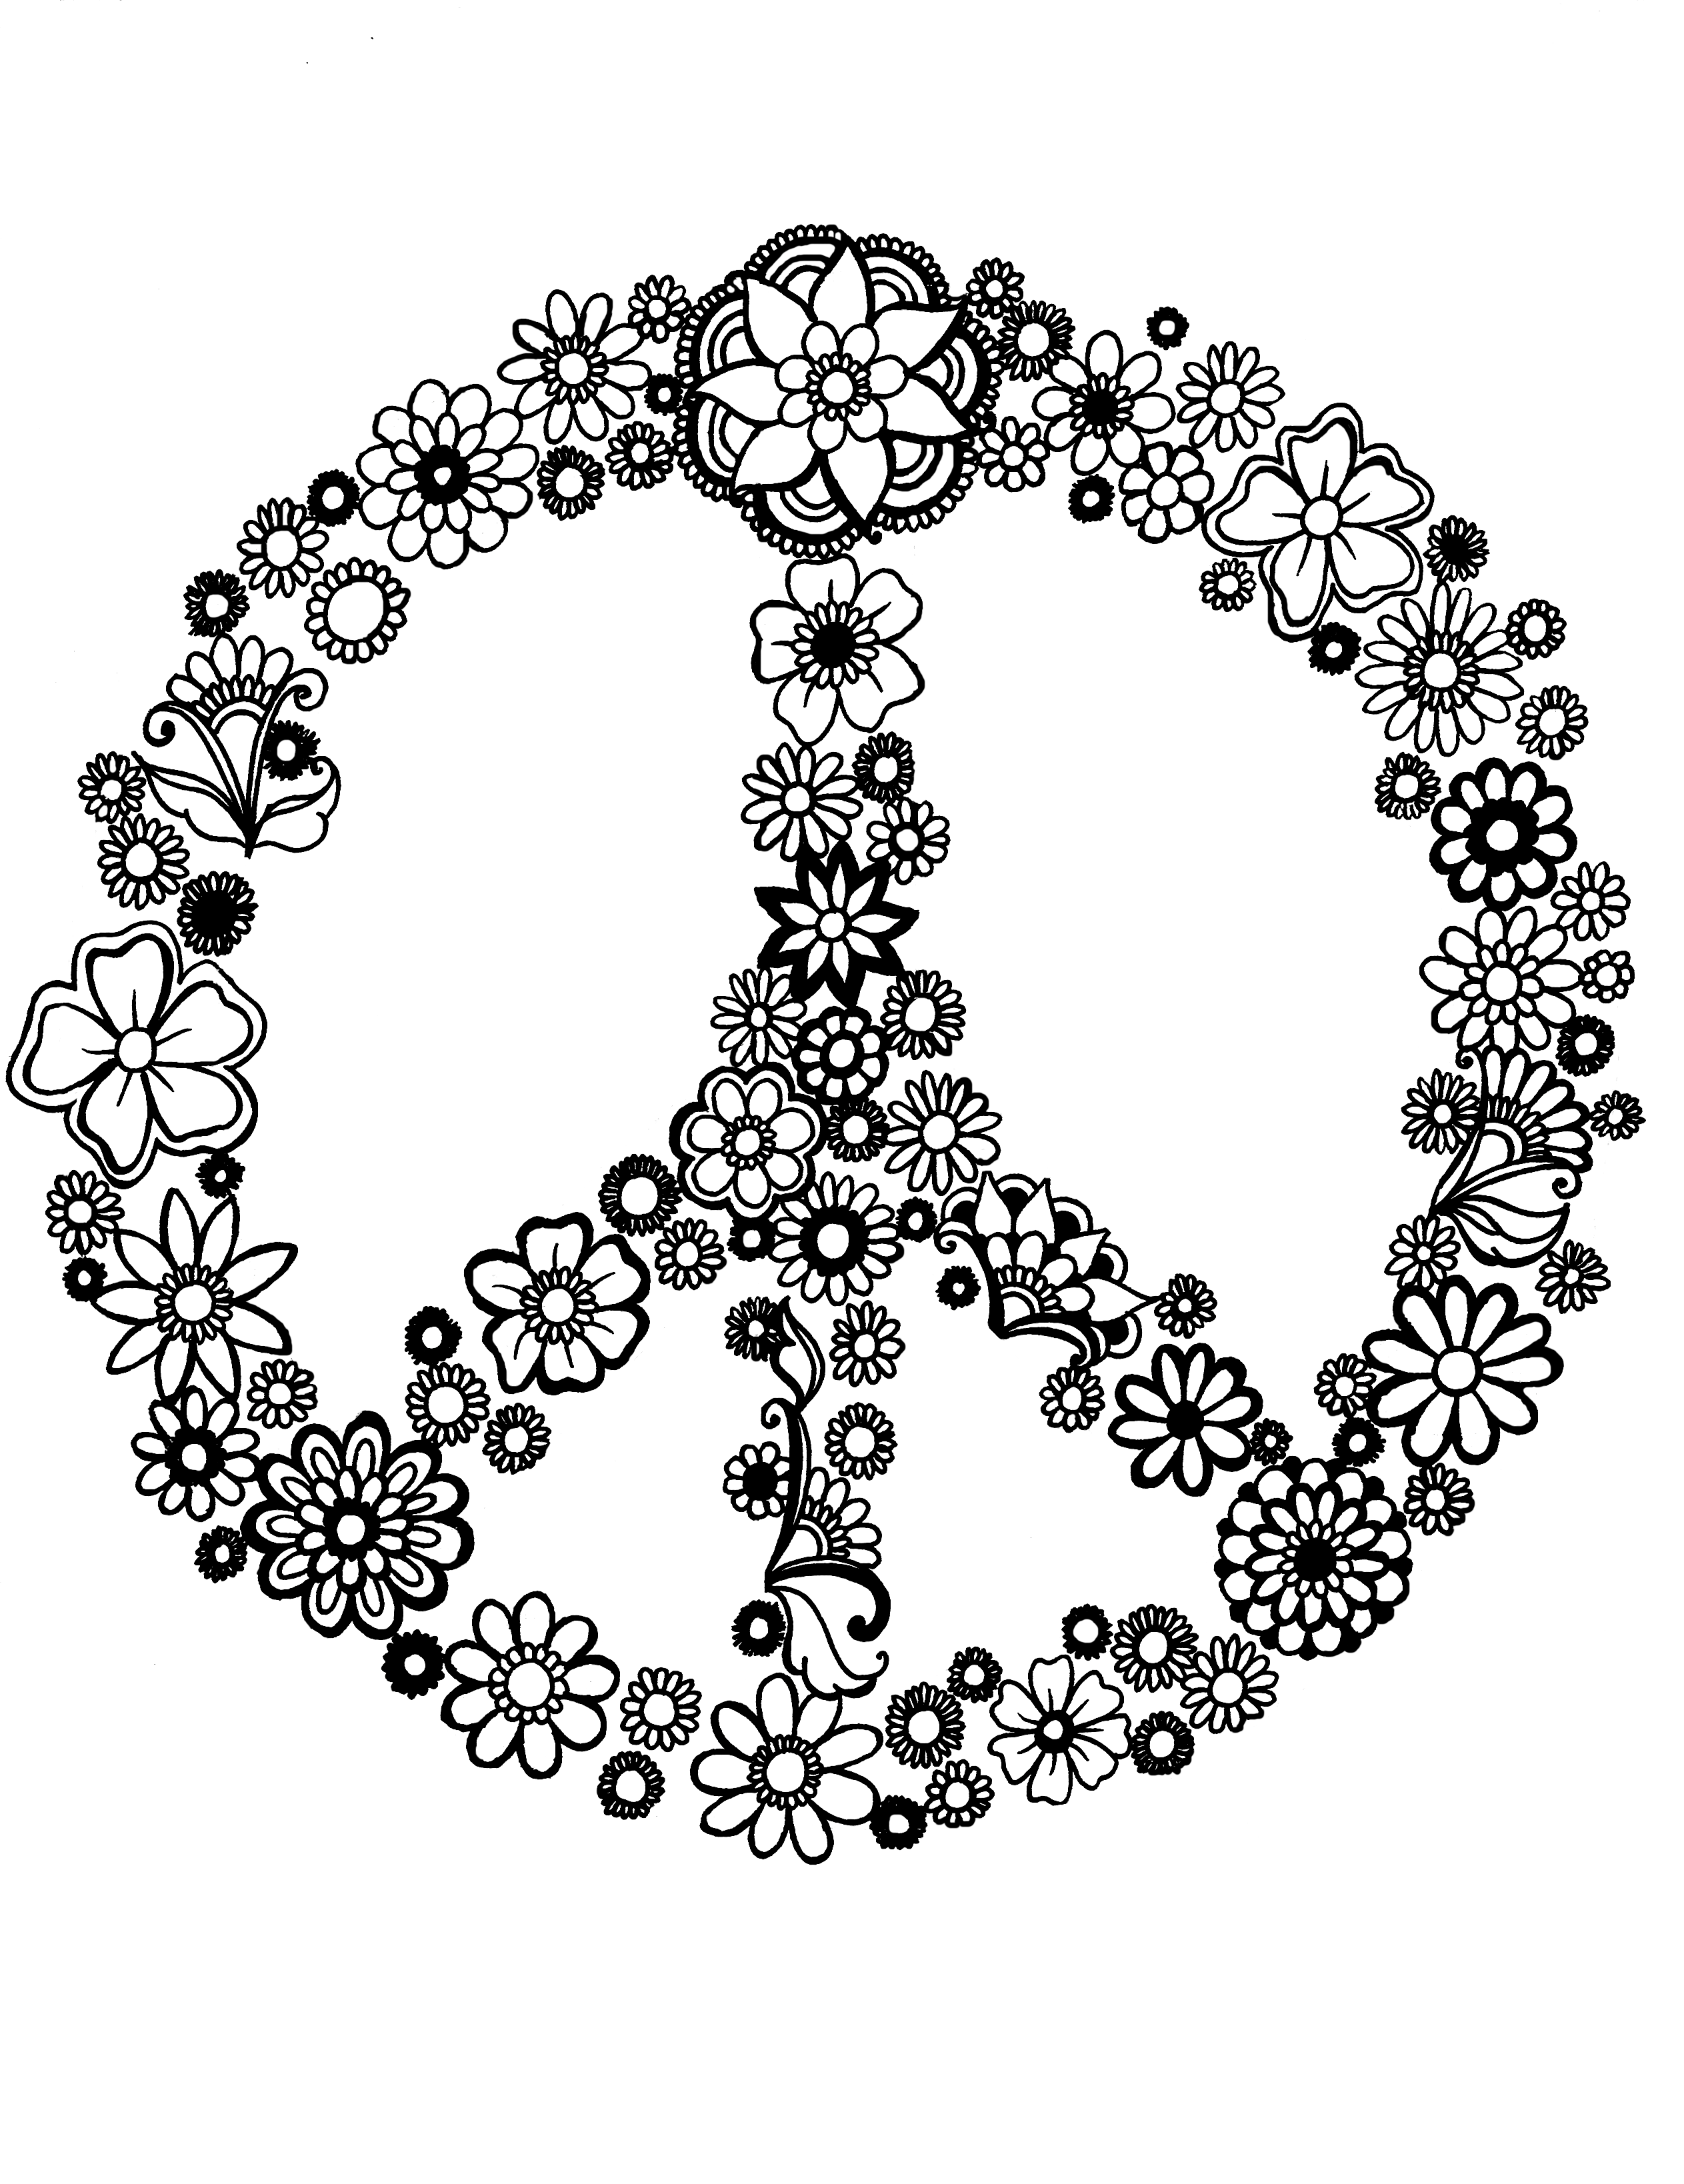 Peace Sign in Mandalas - You-Color